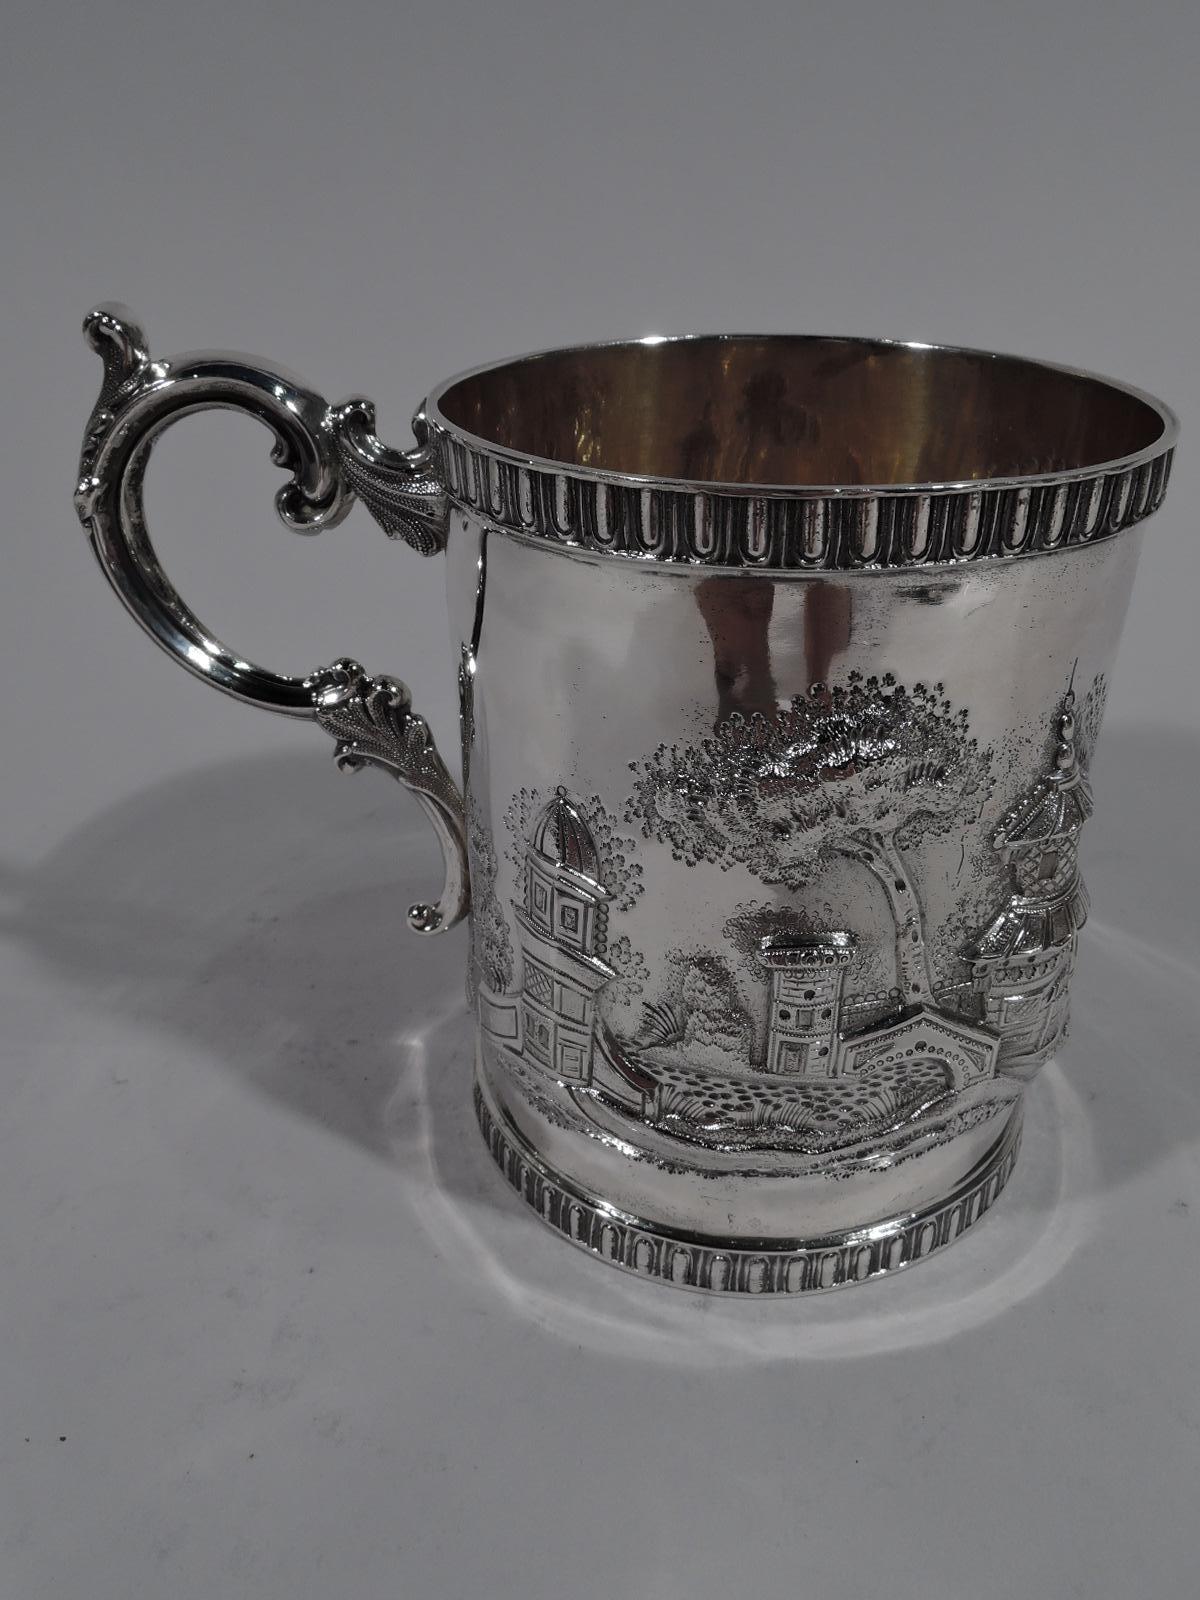 American Philadelphia Coin Silver Baby Cup with Fantasy Turrets and Pagodas